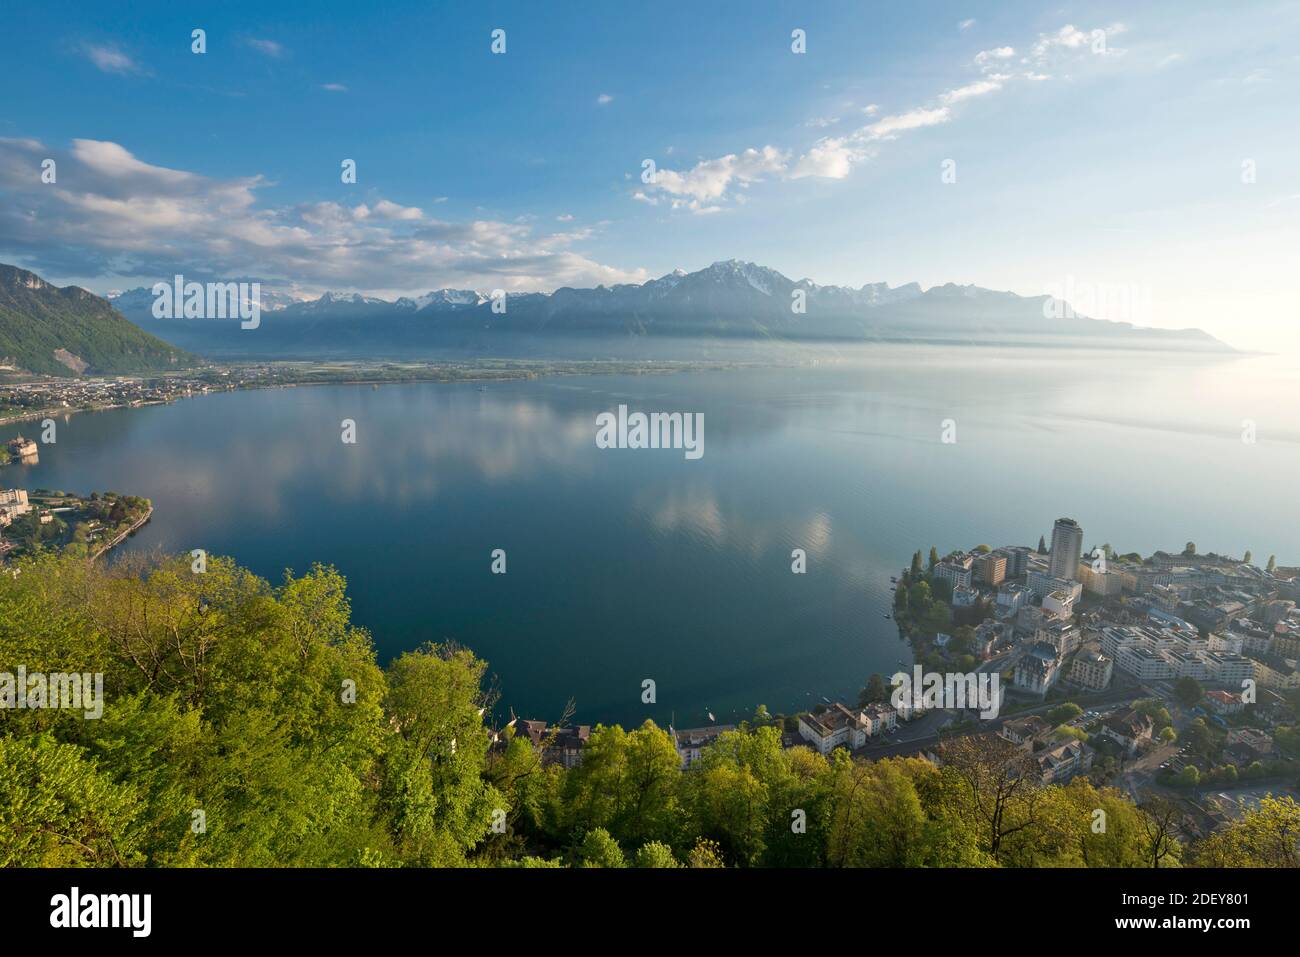 Switzerland Vaud, Waadt, panorama, Montreux, Clarens, France, Lac Léman, Genfer See, Geneva Lake Stock Photo